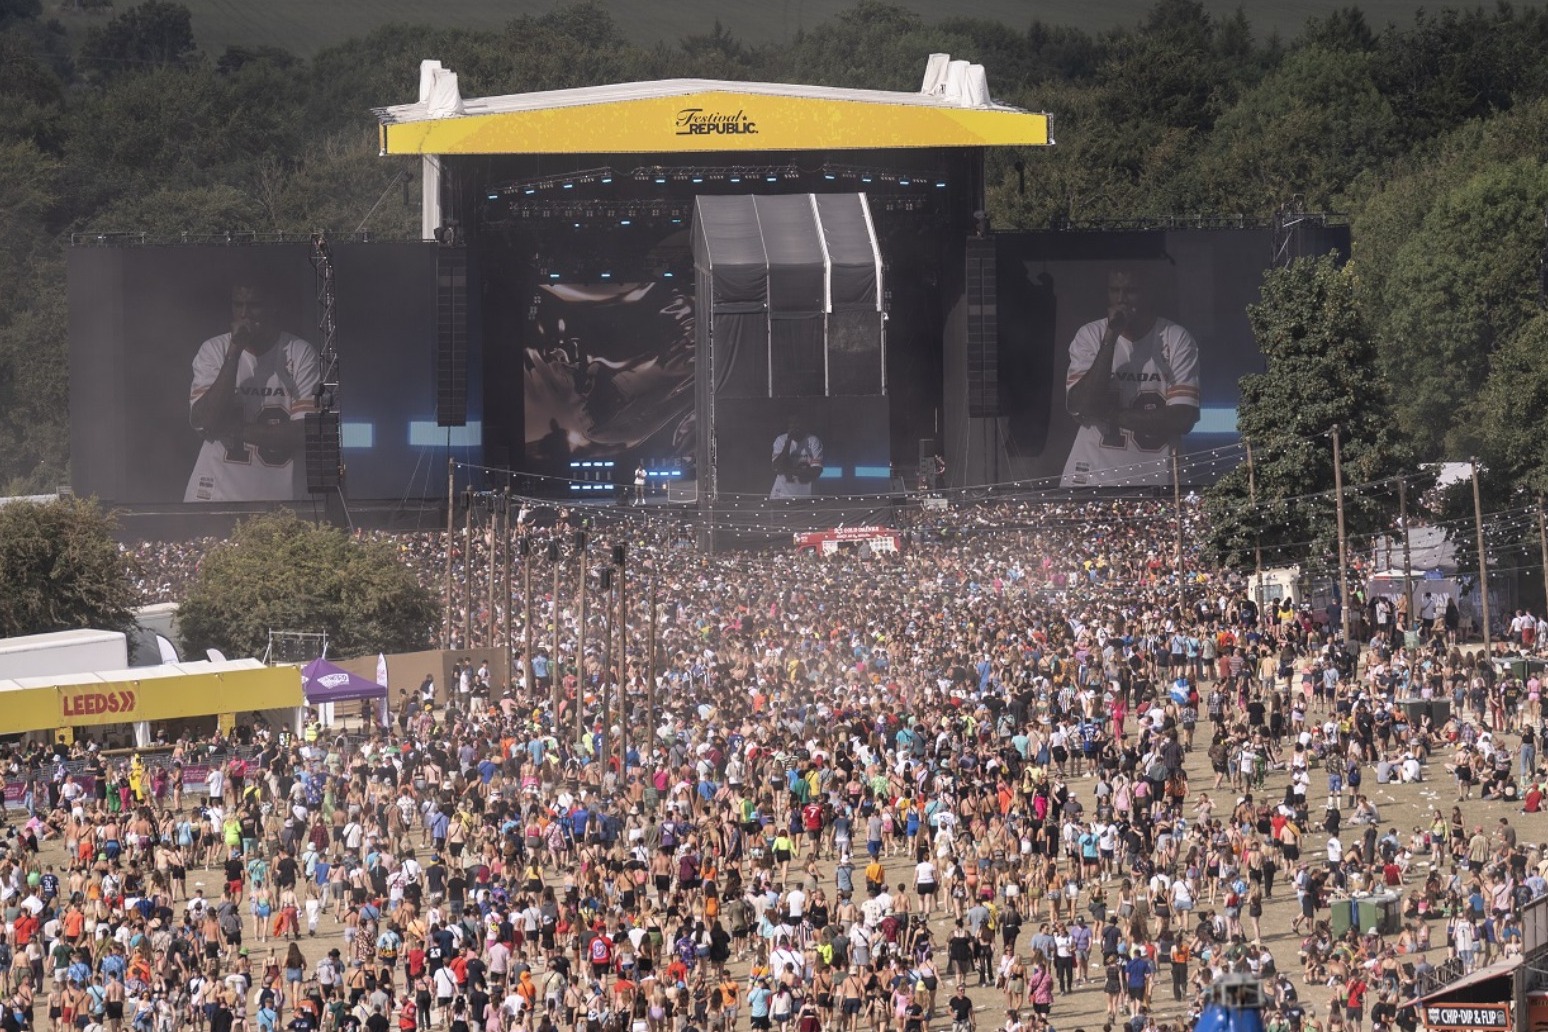 16 year old boy dies after suspected drug-related incident at Leeds Festival 